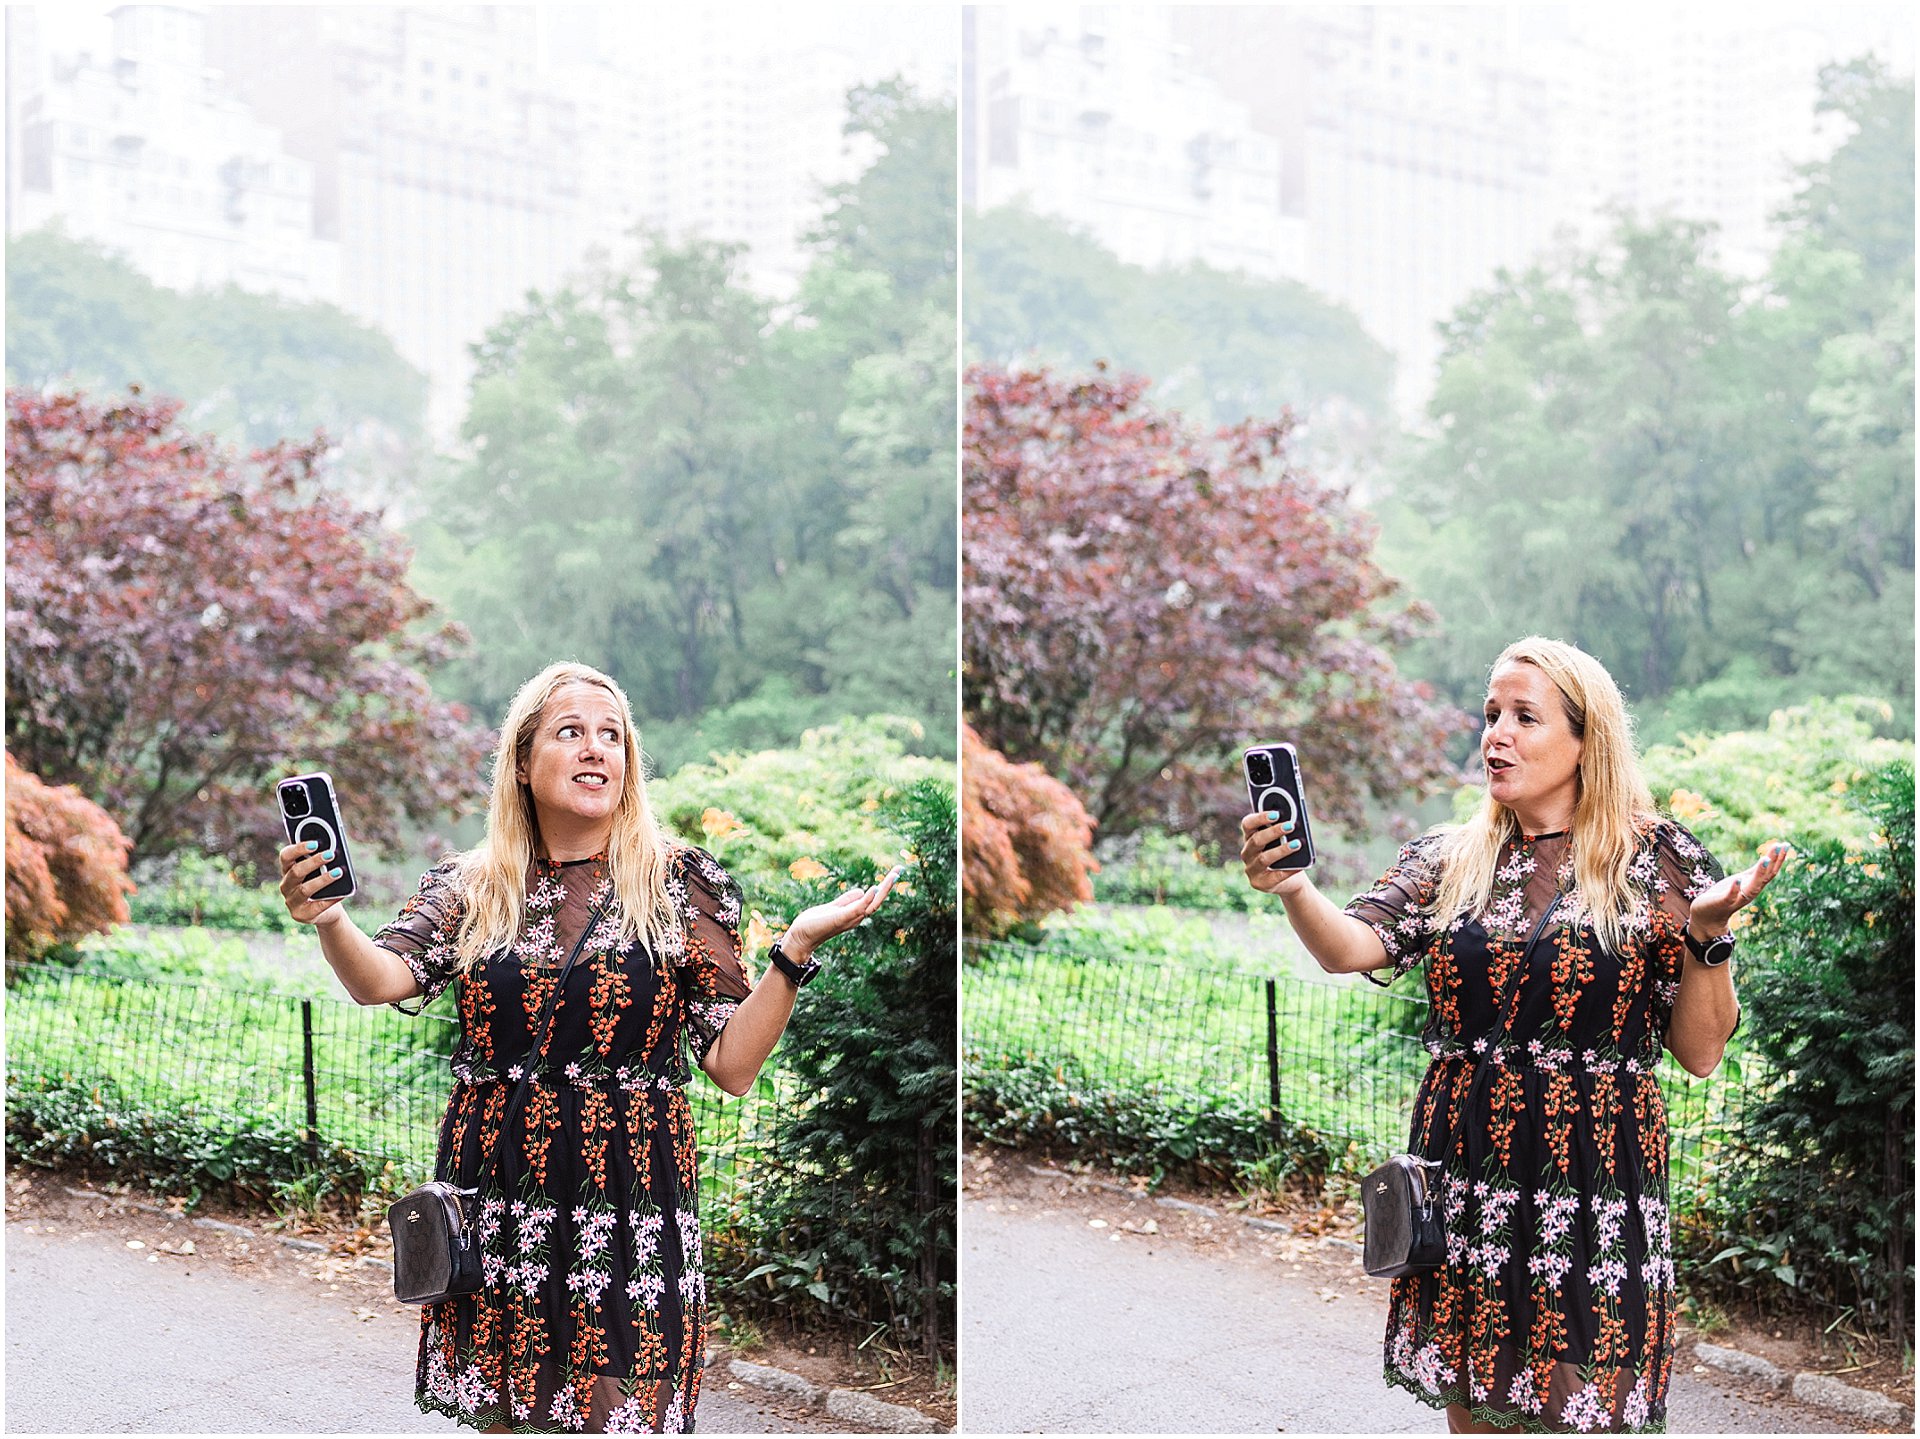 SEO Expert Claire Taylor is stood in Central Park for her New York Brand Shoot wearing a patterned shift dress. Image by London brand photographer AKP Branding Stories